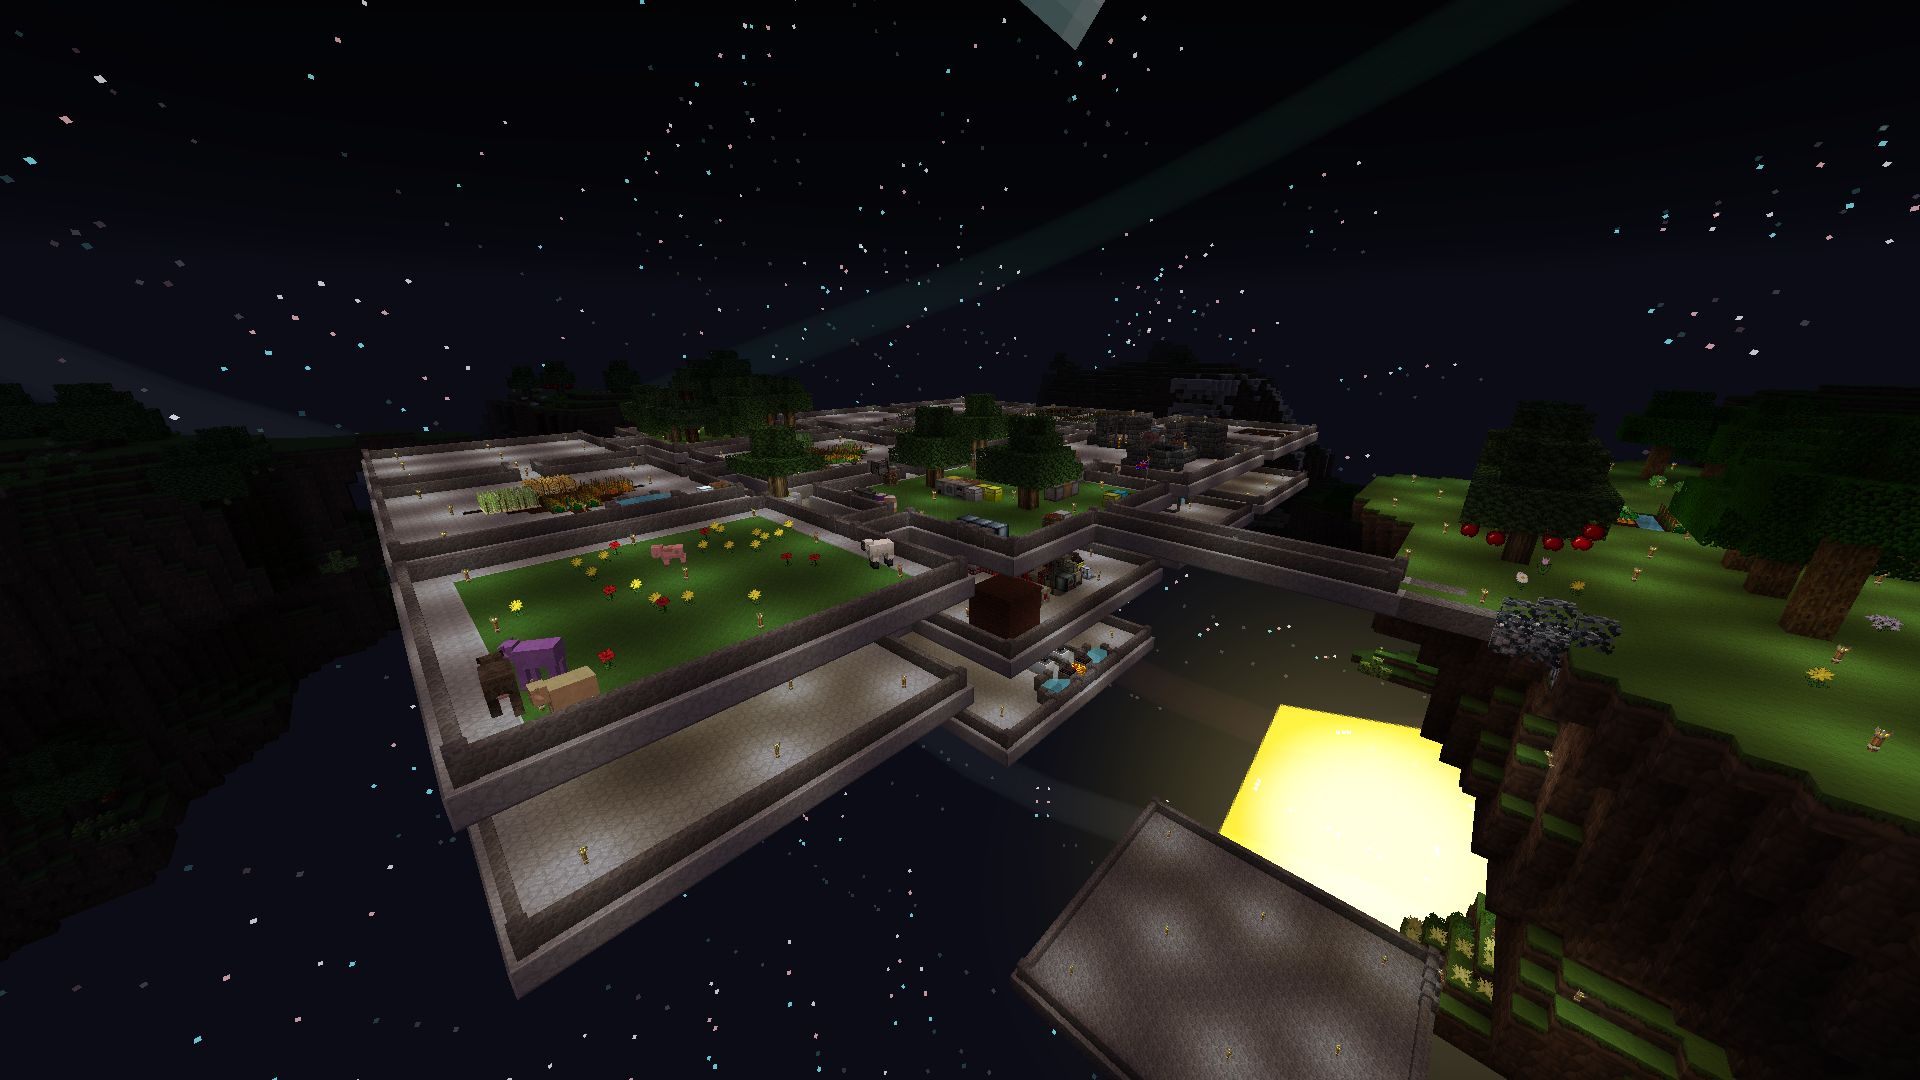 The skyblock at night